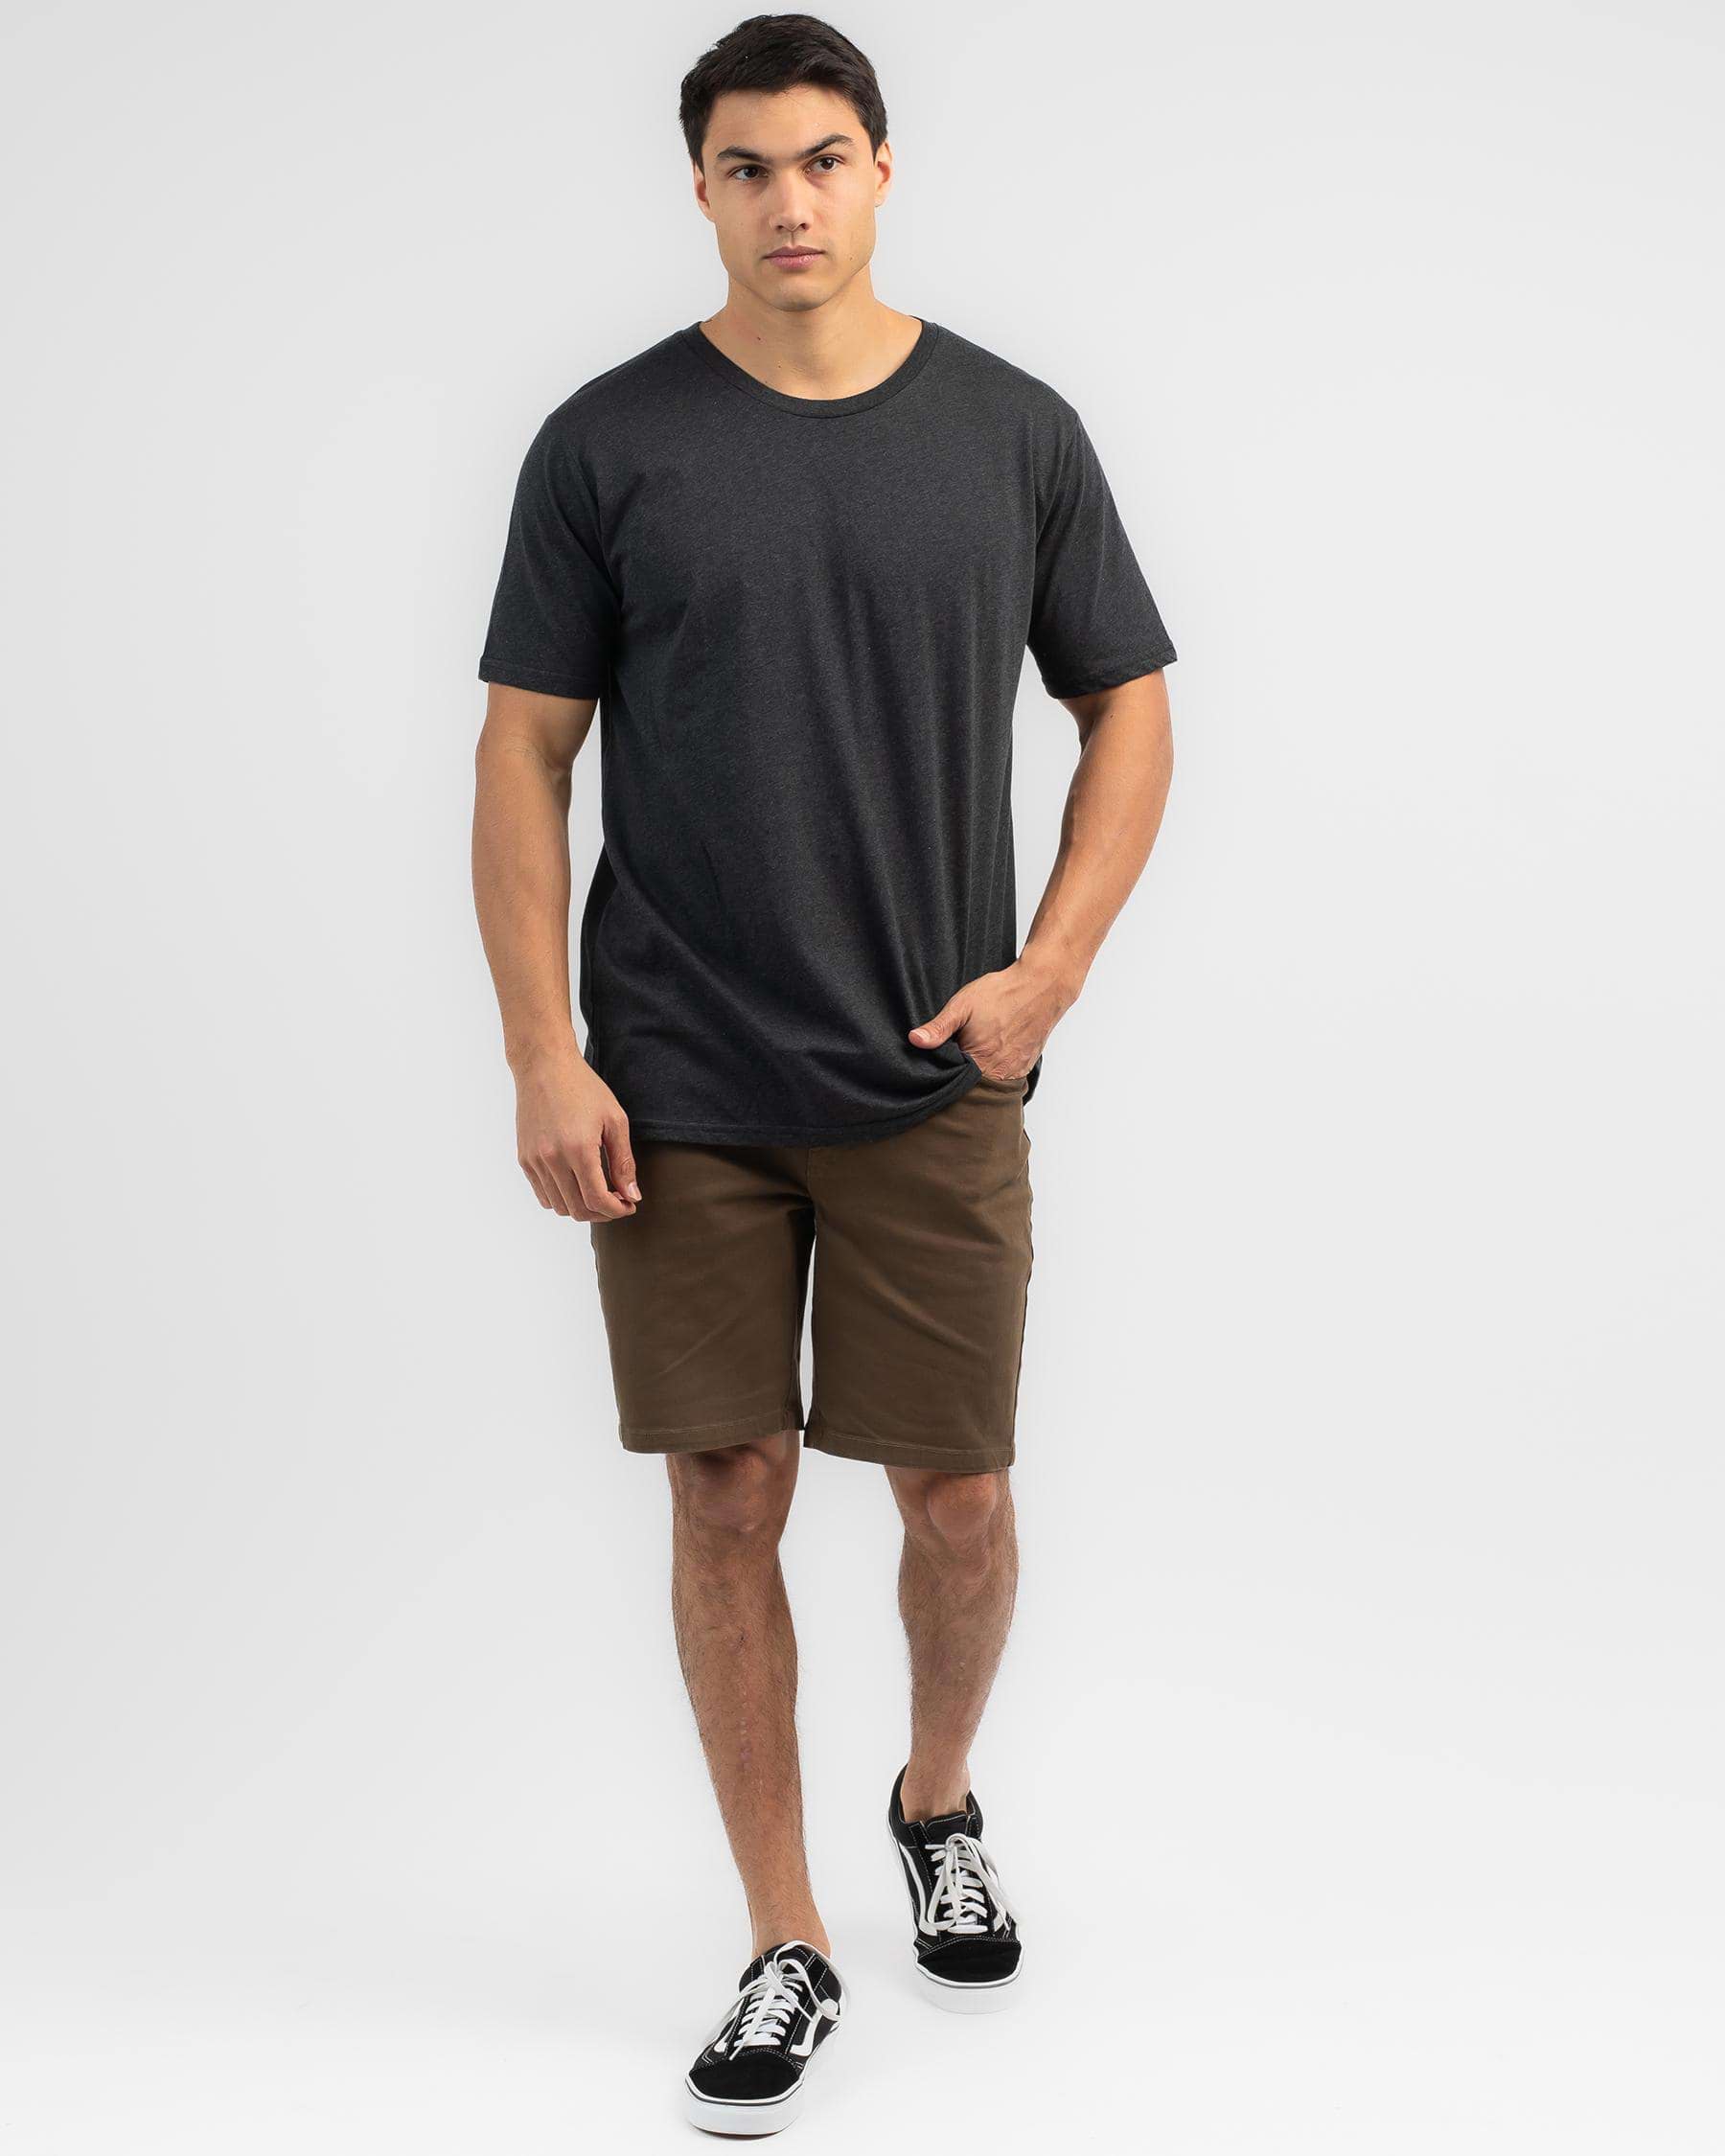 Lucid Essential 2.0 T-Shirt In Char Marle - Fast Shipping & Easy ...